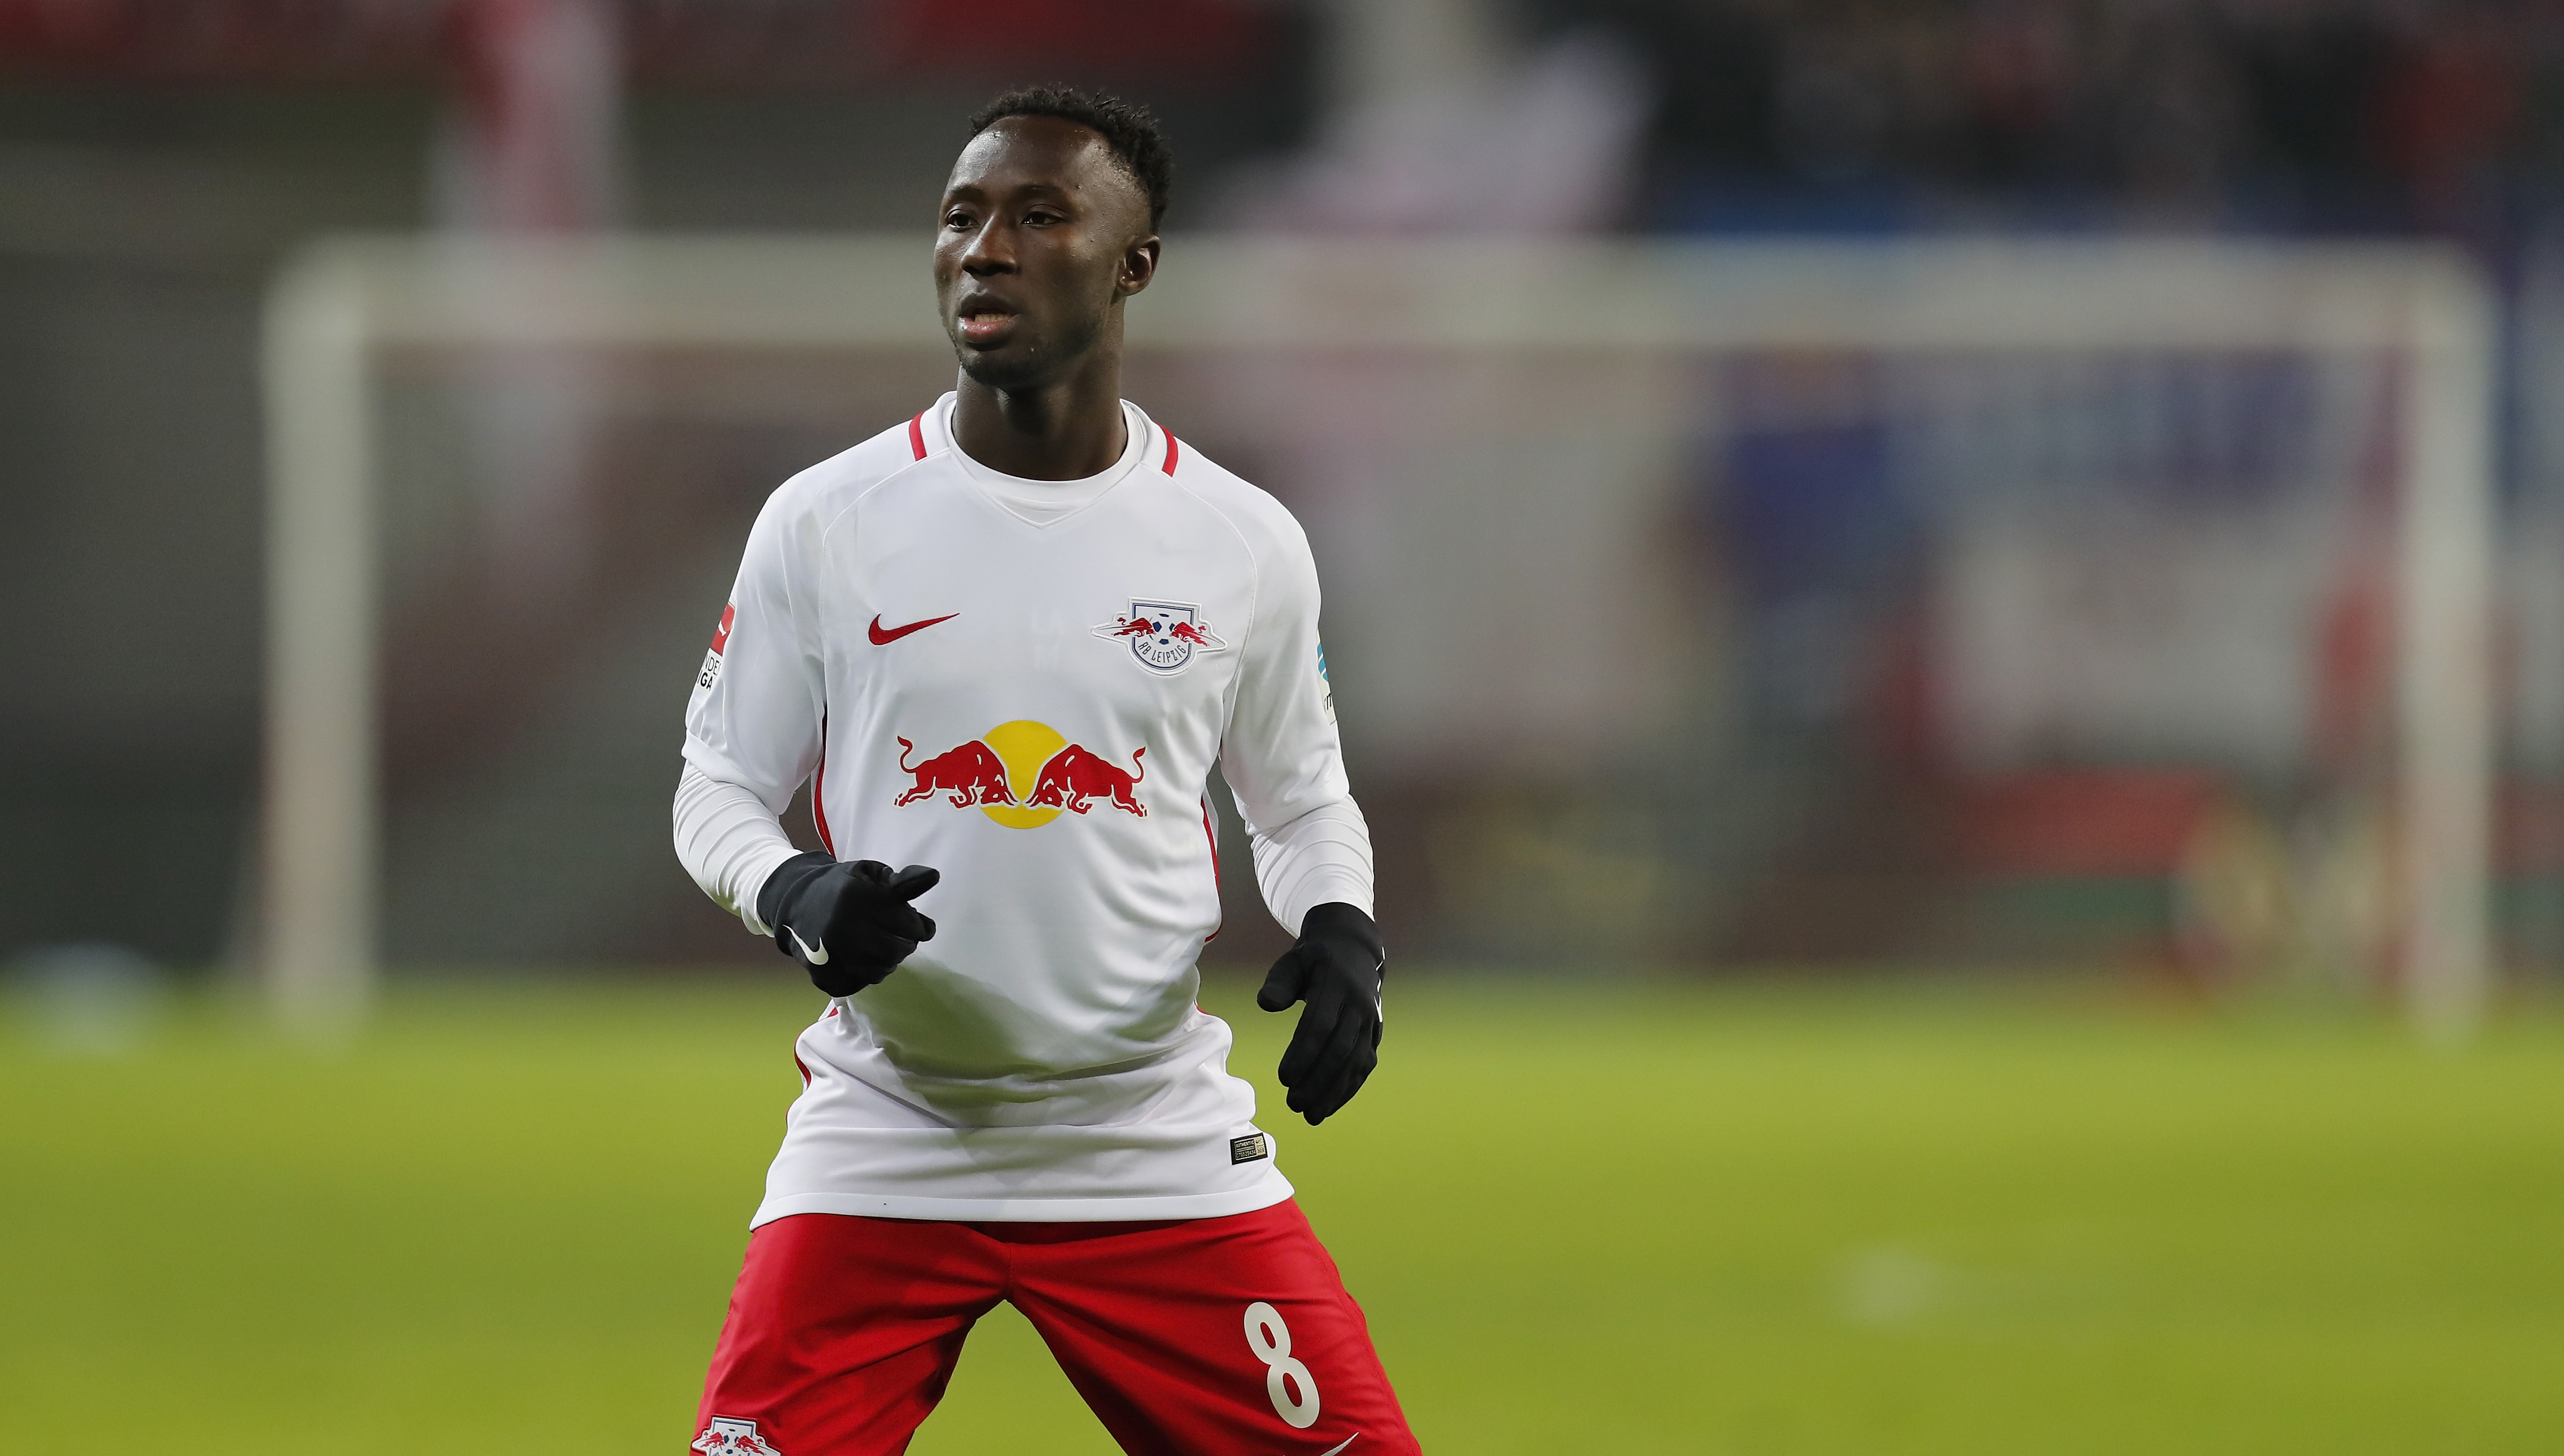 LEIPZIG, GERMANY - JANUARY 21:  Naby Keita of RB Leipzig looks on during the Bundesliga match between RB Leipzig and Eintracht Frankfurt at Red Bull Arena on January 21, 2017 in Leipzig, Germany.  (Photo by Boris Streubel/Bongarts/Getty Images)